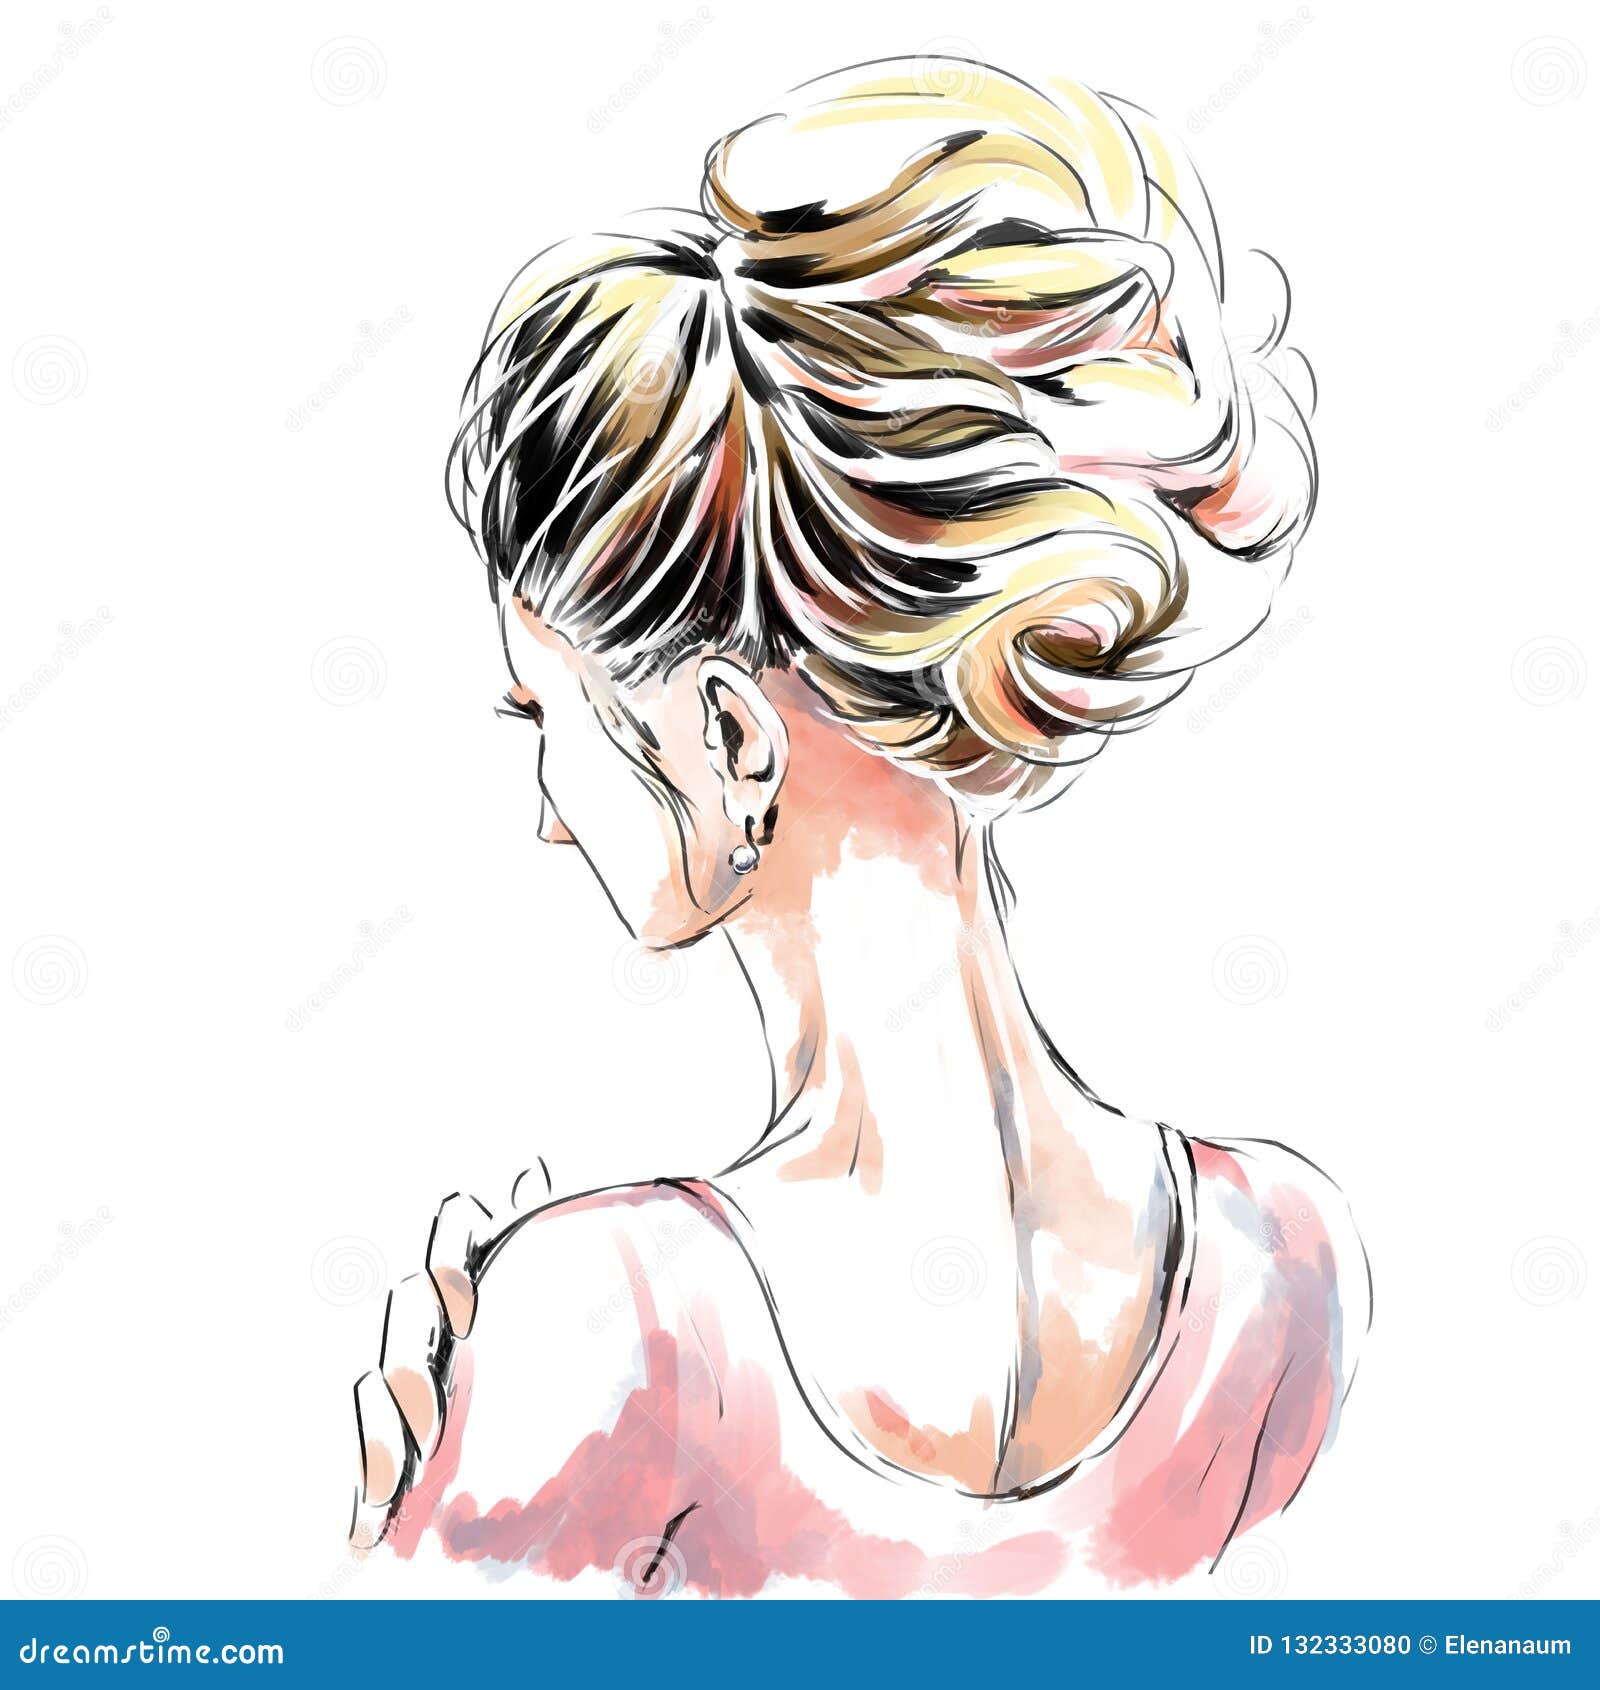 Top more than 144 sketches of womens backs latest